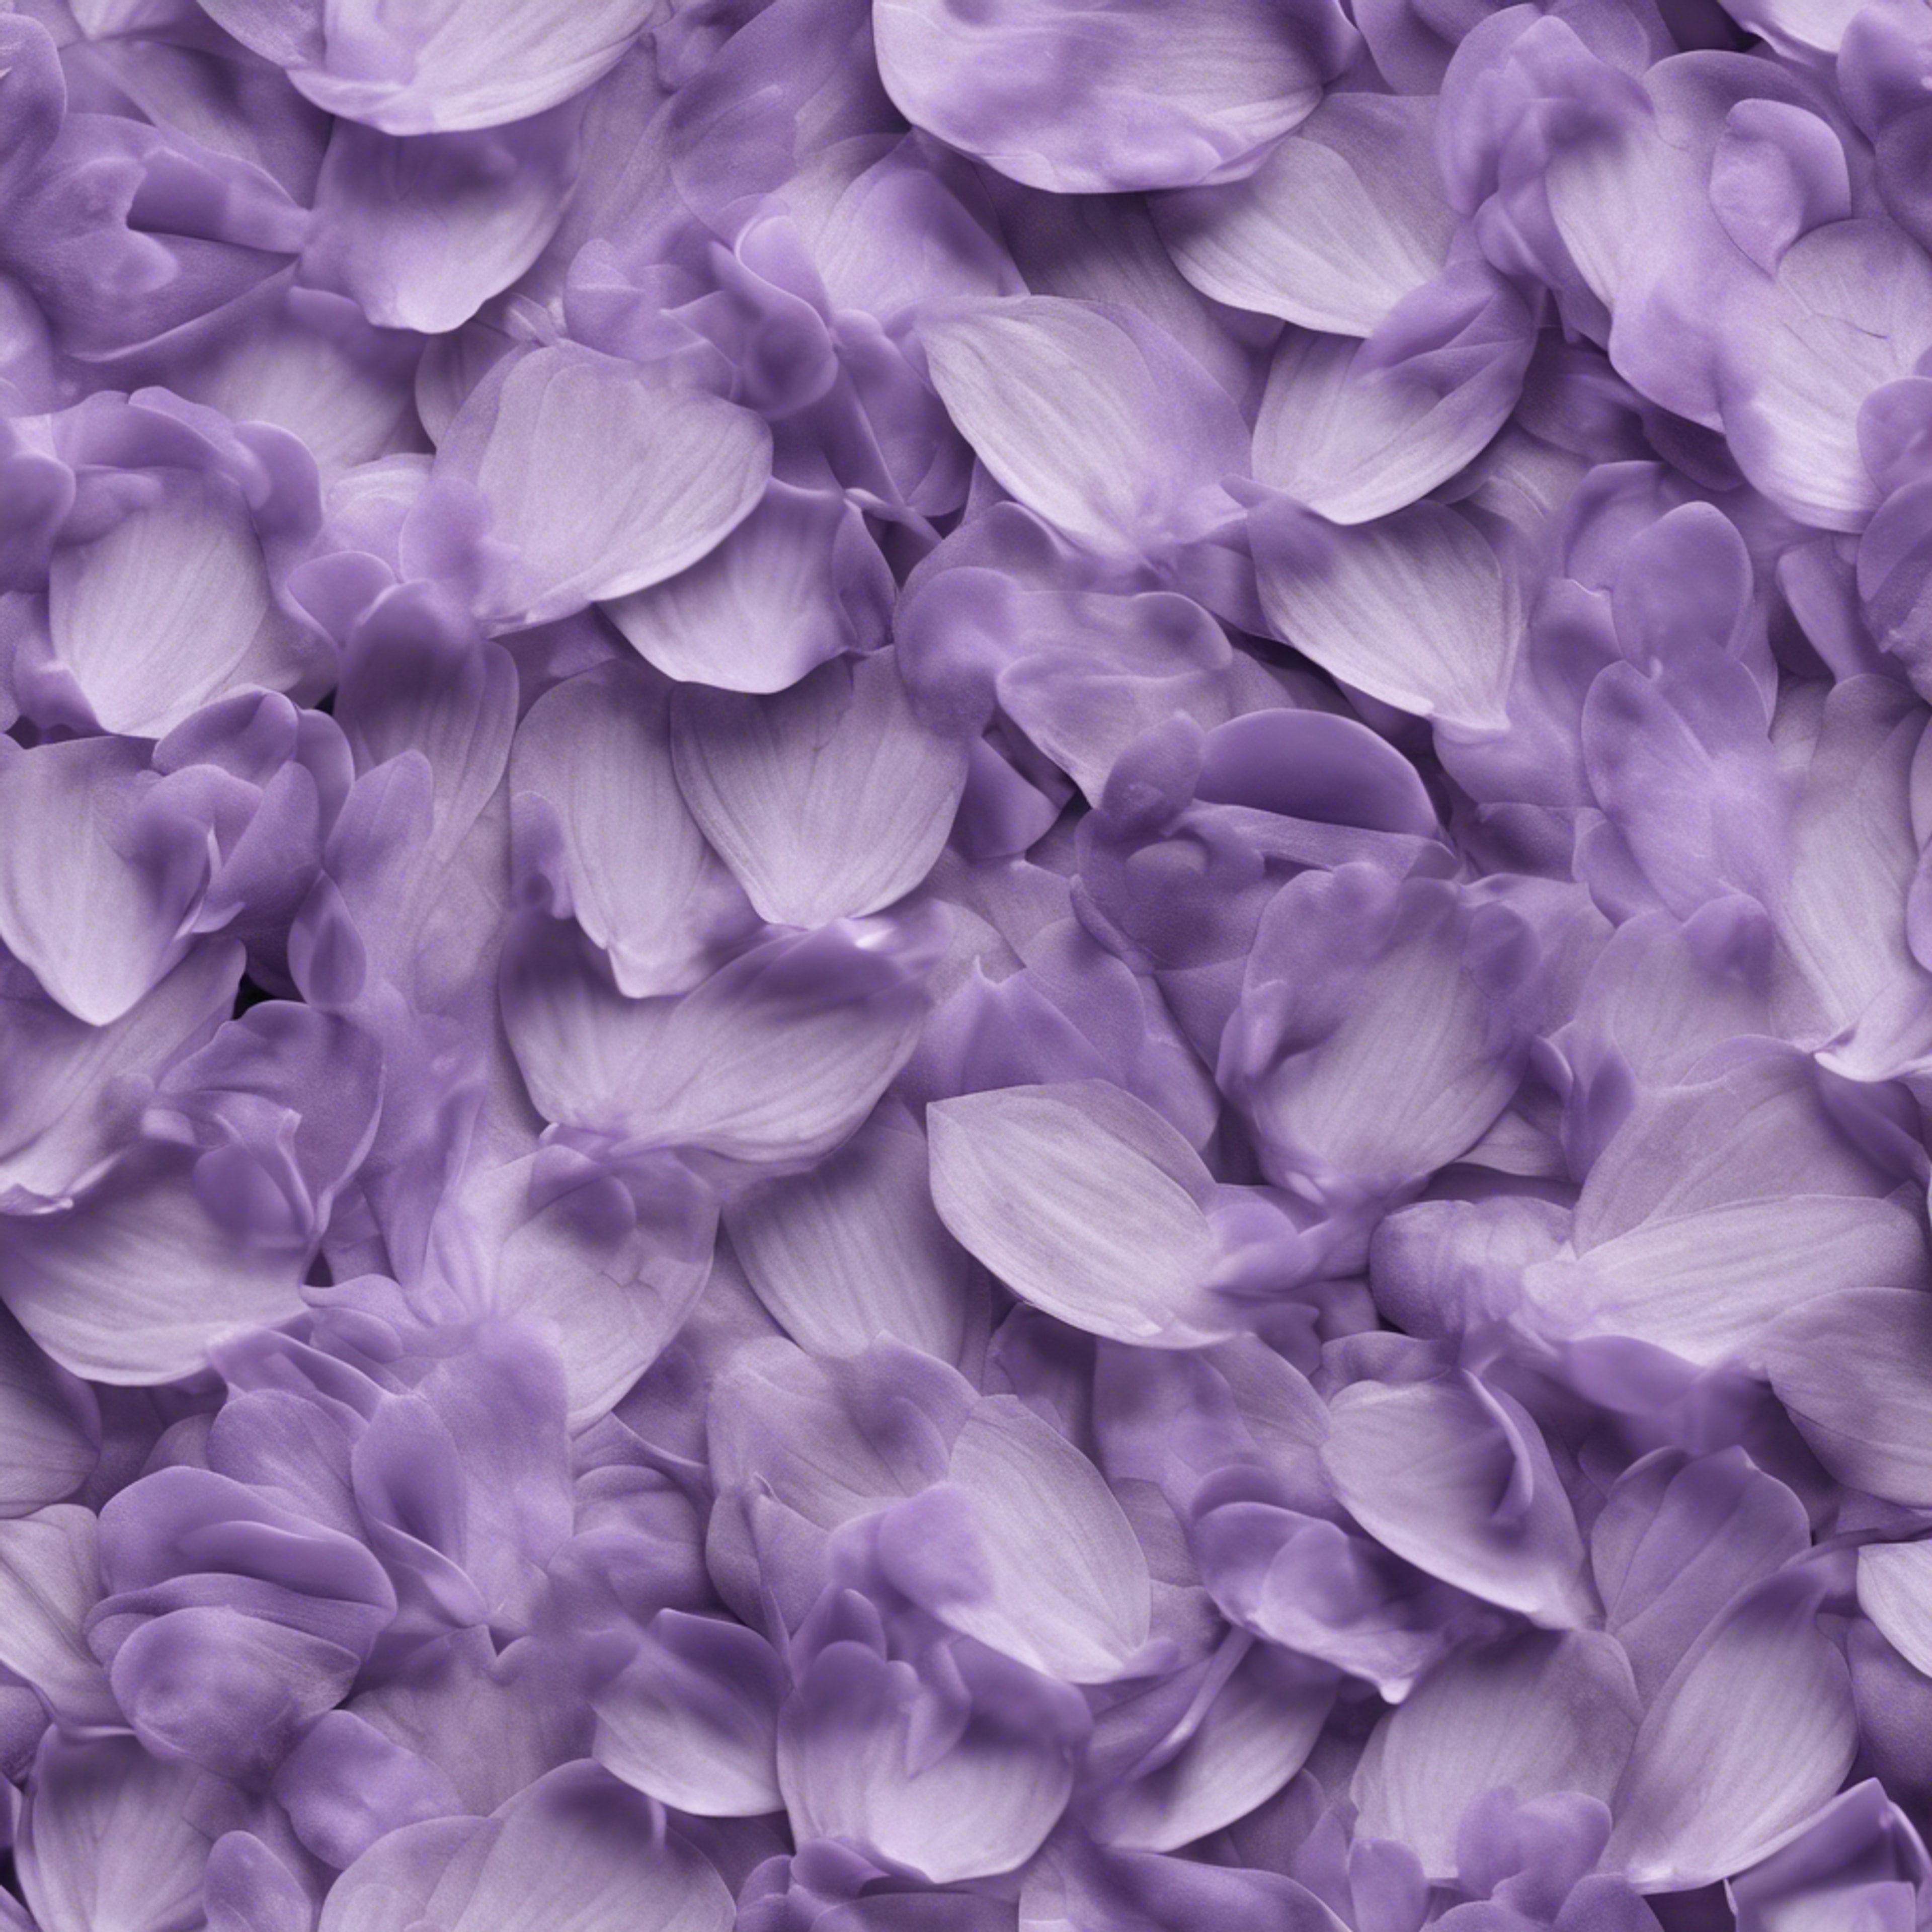 Seamless delicate pattern of layered lavender petals Ფონი[df581ced6ed94056816b]